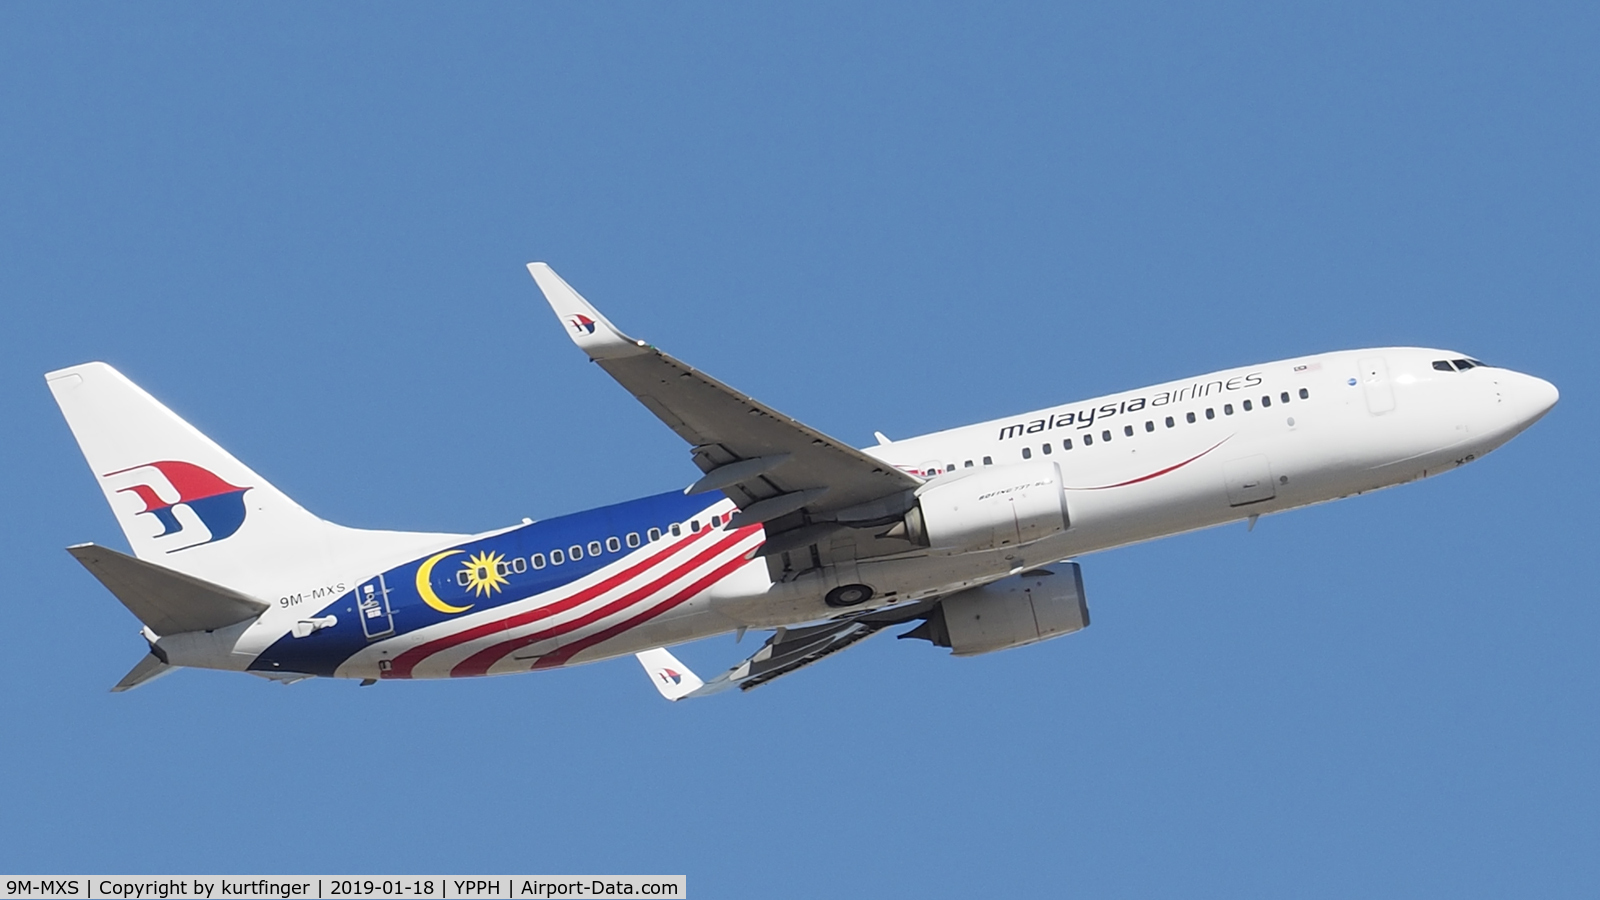 9M-MXS, 2014 Boeing 737-8H6 C/N 40156, Boeing 737-8H6. Malaysian Airlines 9M-MXS, departed runway 21 YPPH 18/01/19.